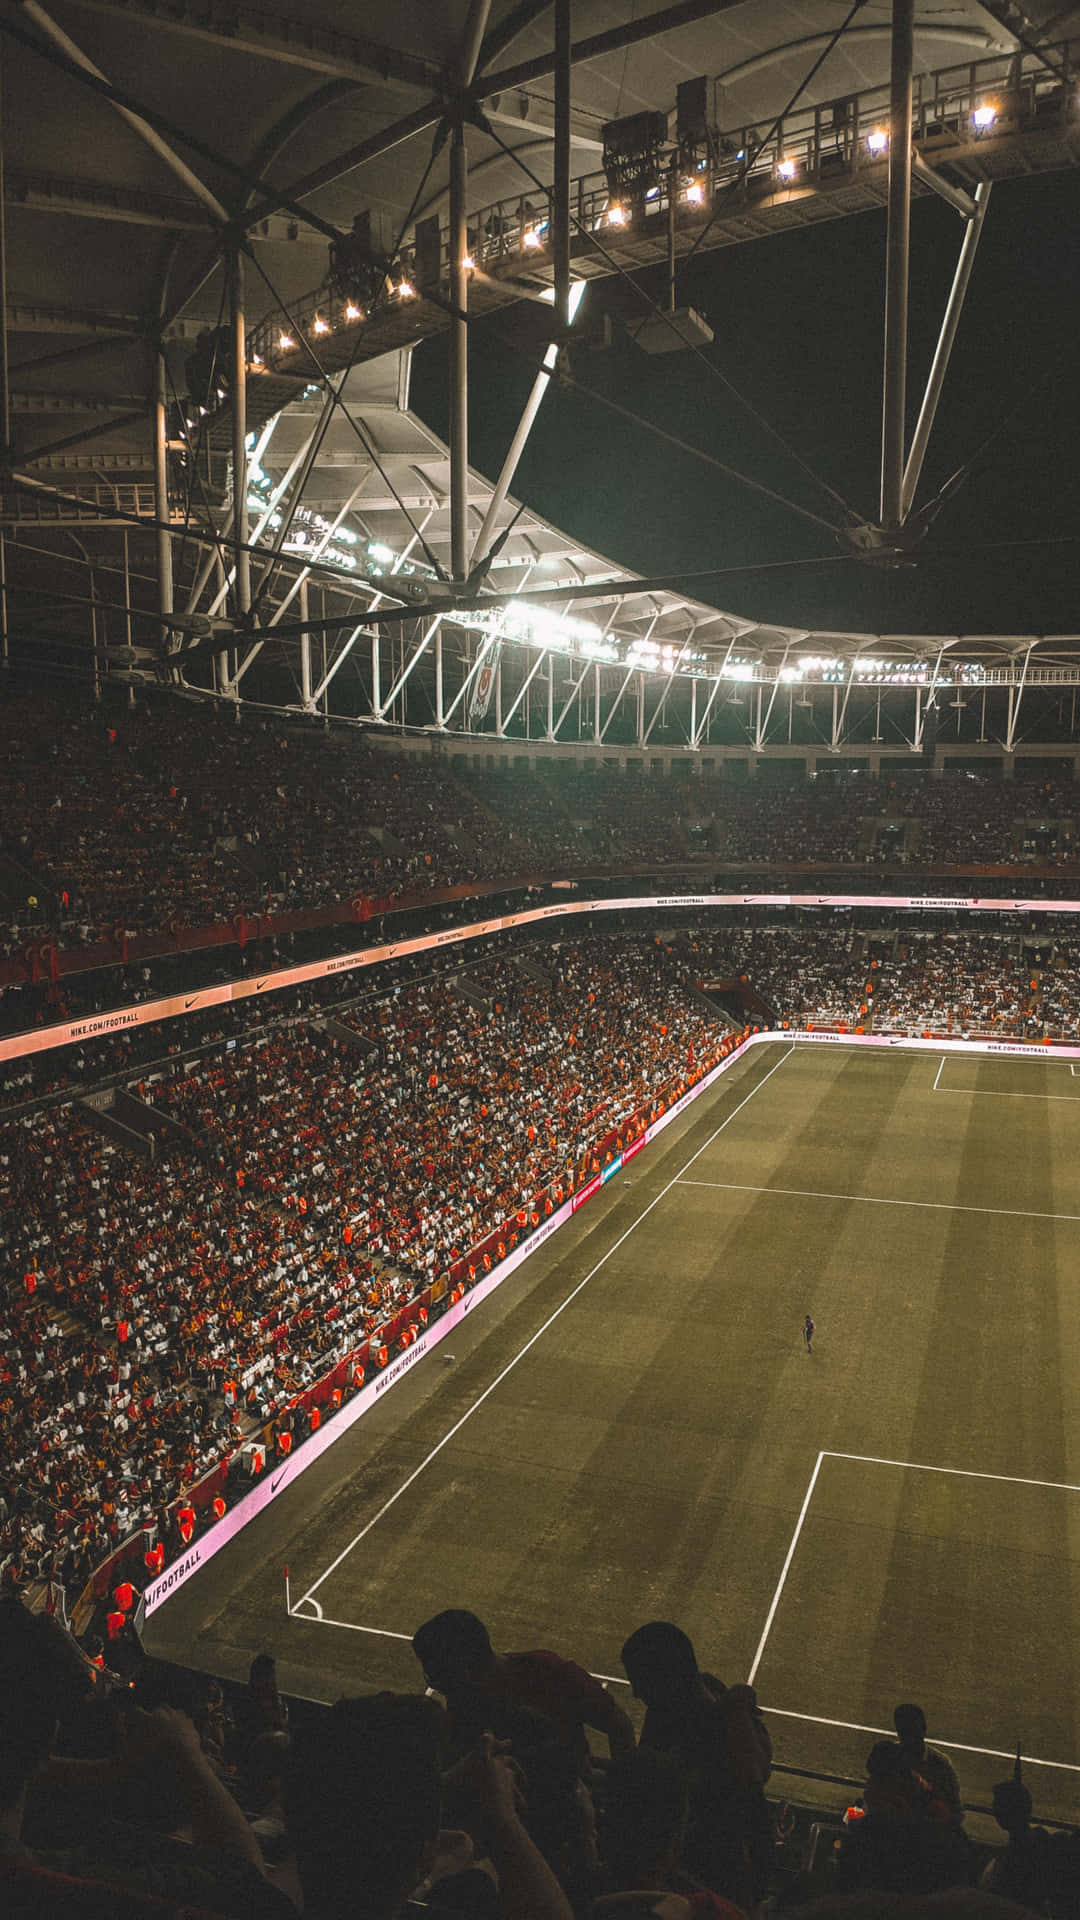 Exciting match under the bright lights at a modern soccer stadium